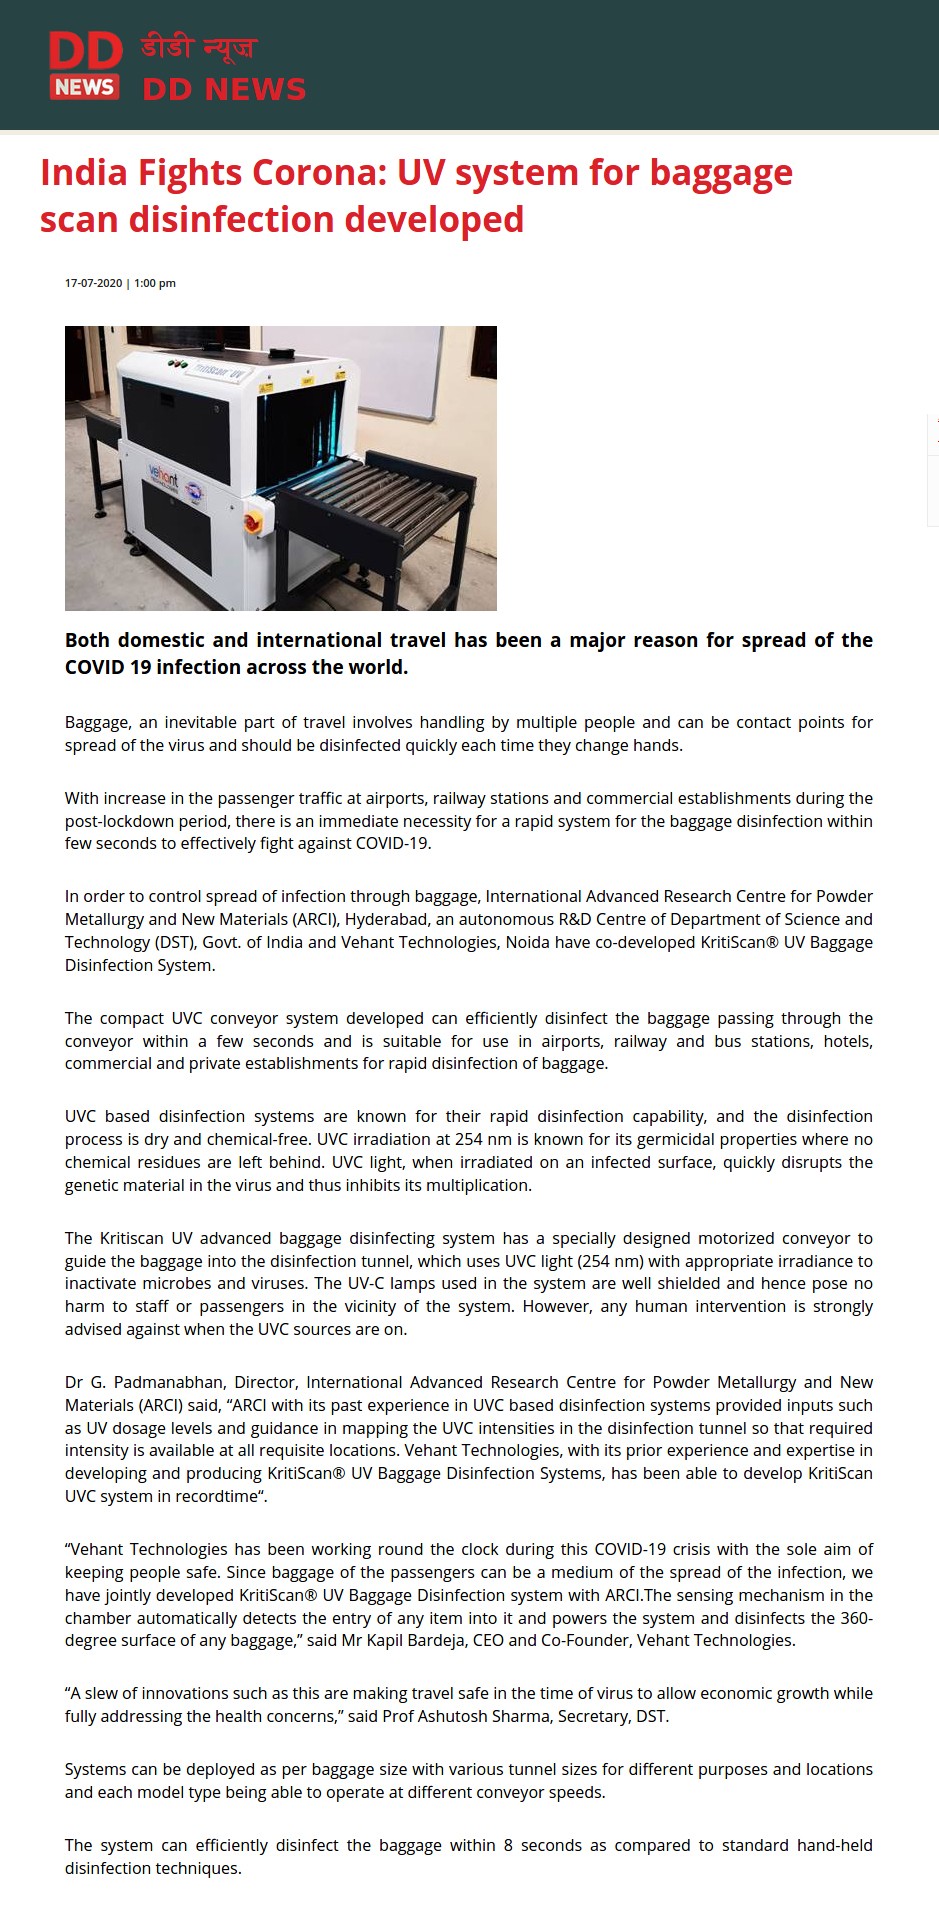 DD News covers Ultra Violet-C light based Baggage/luggage Disinfection System